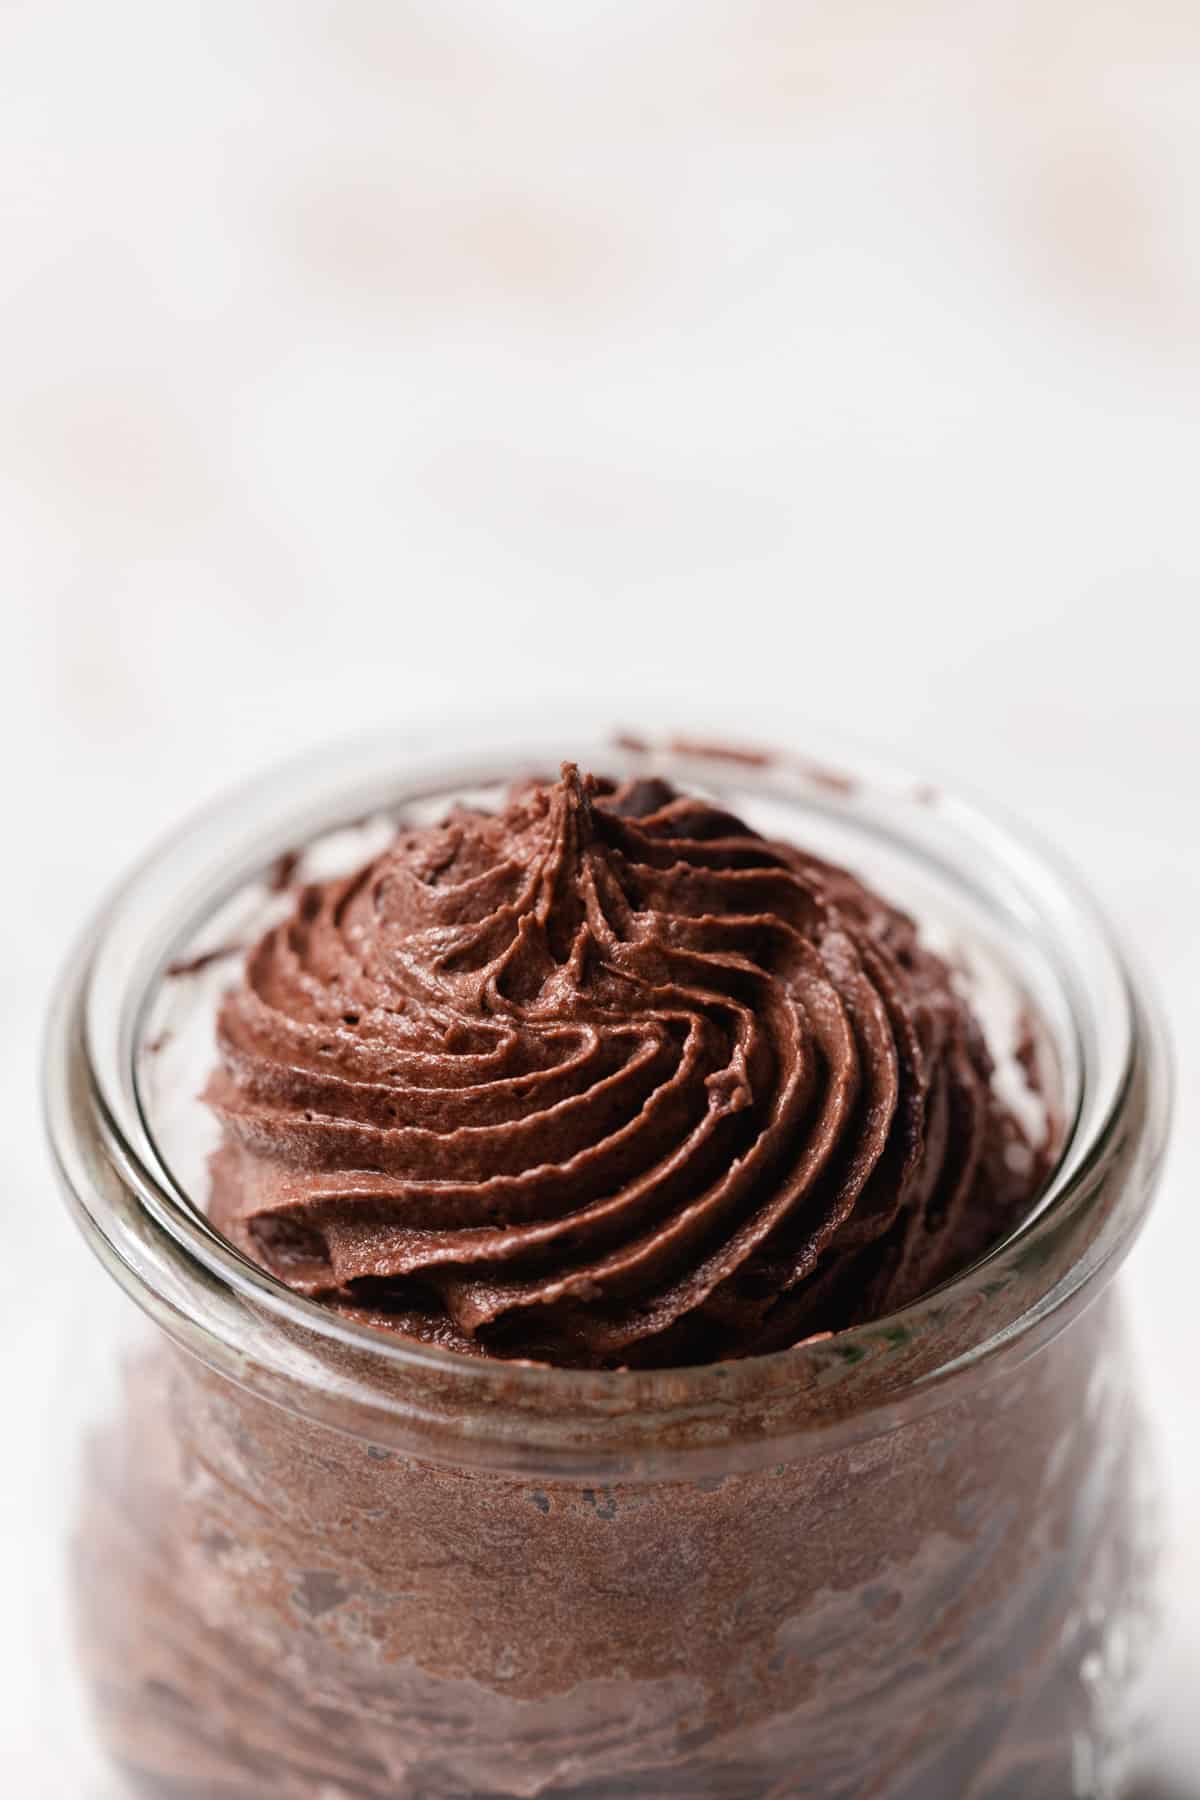 Chocolate frosting in a glass jar.